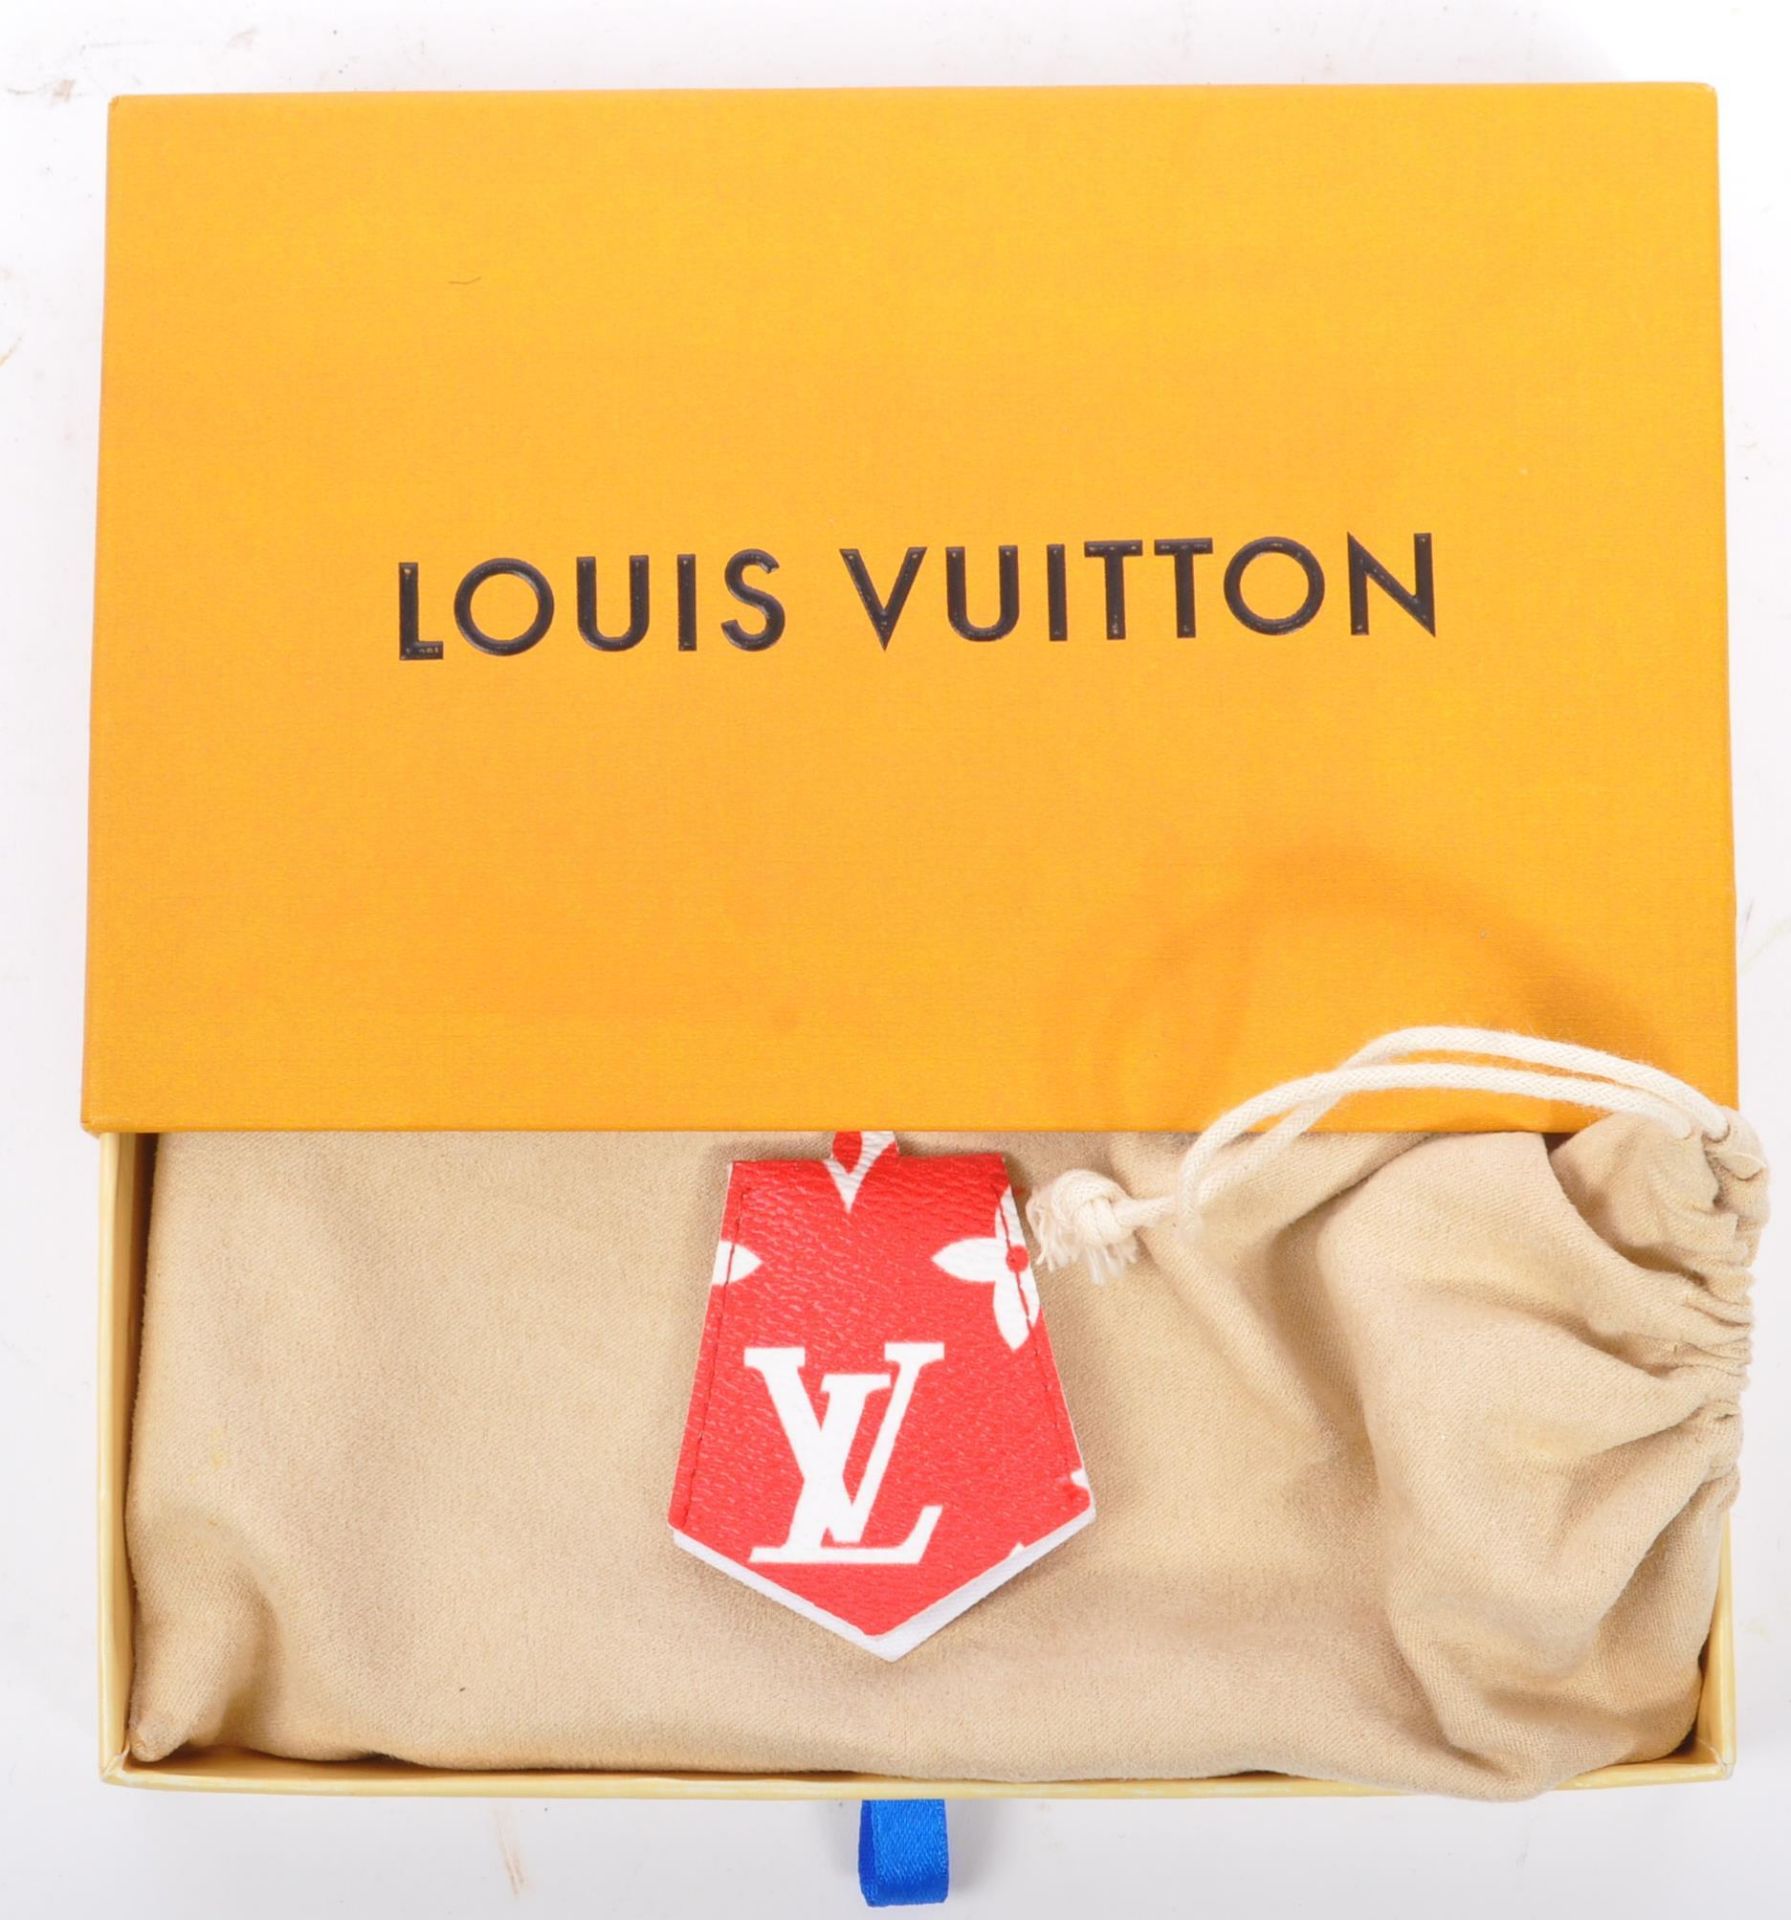 LOUIS VUITTON X SUPREME RED / GOLD IPHONE 7 CASE IN BOX - Image 3 of 7